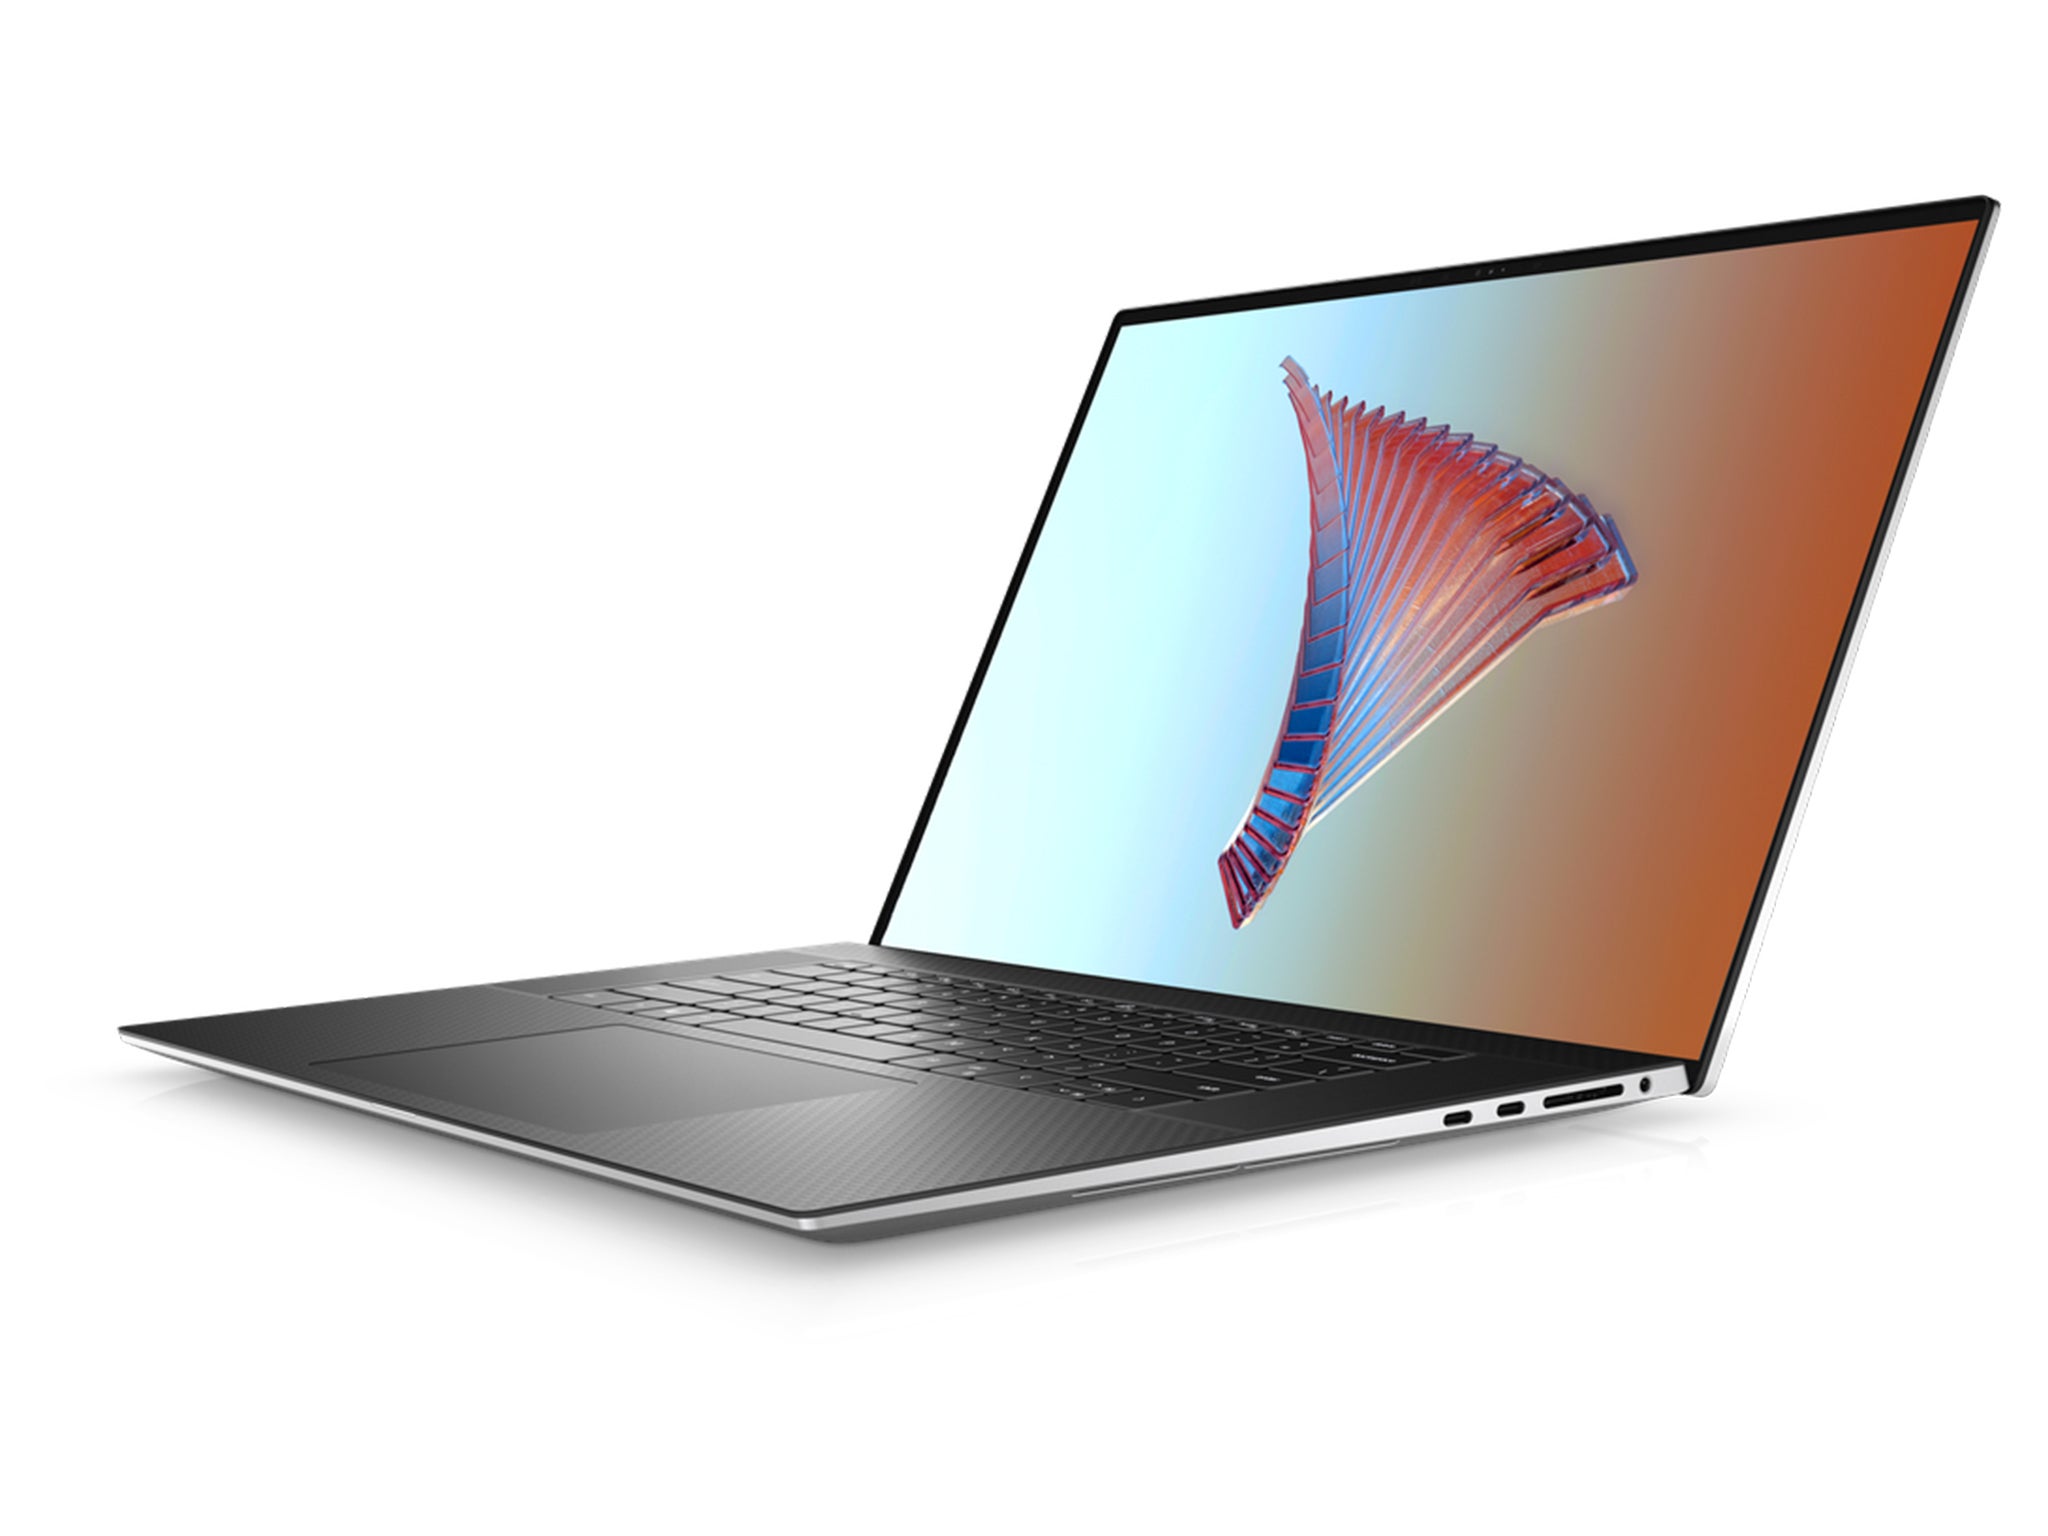 The Dell XPS 17